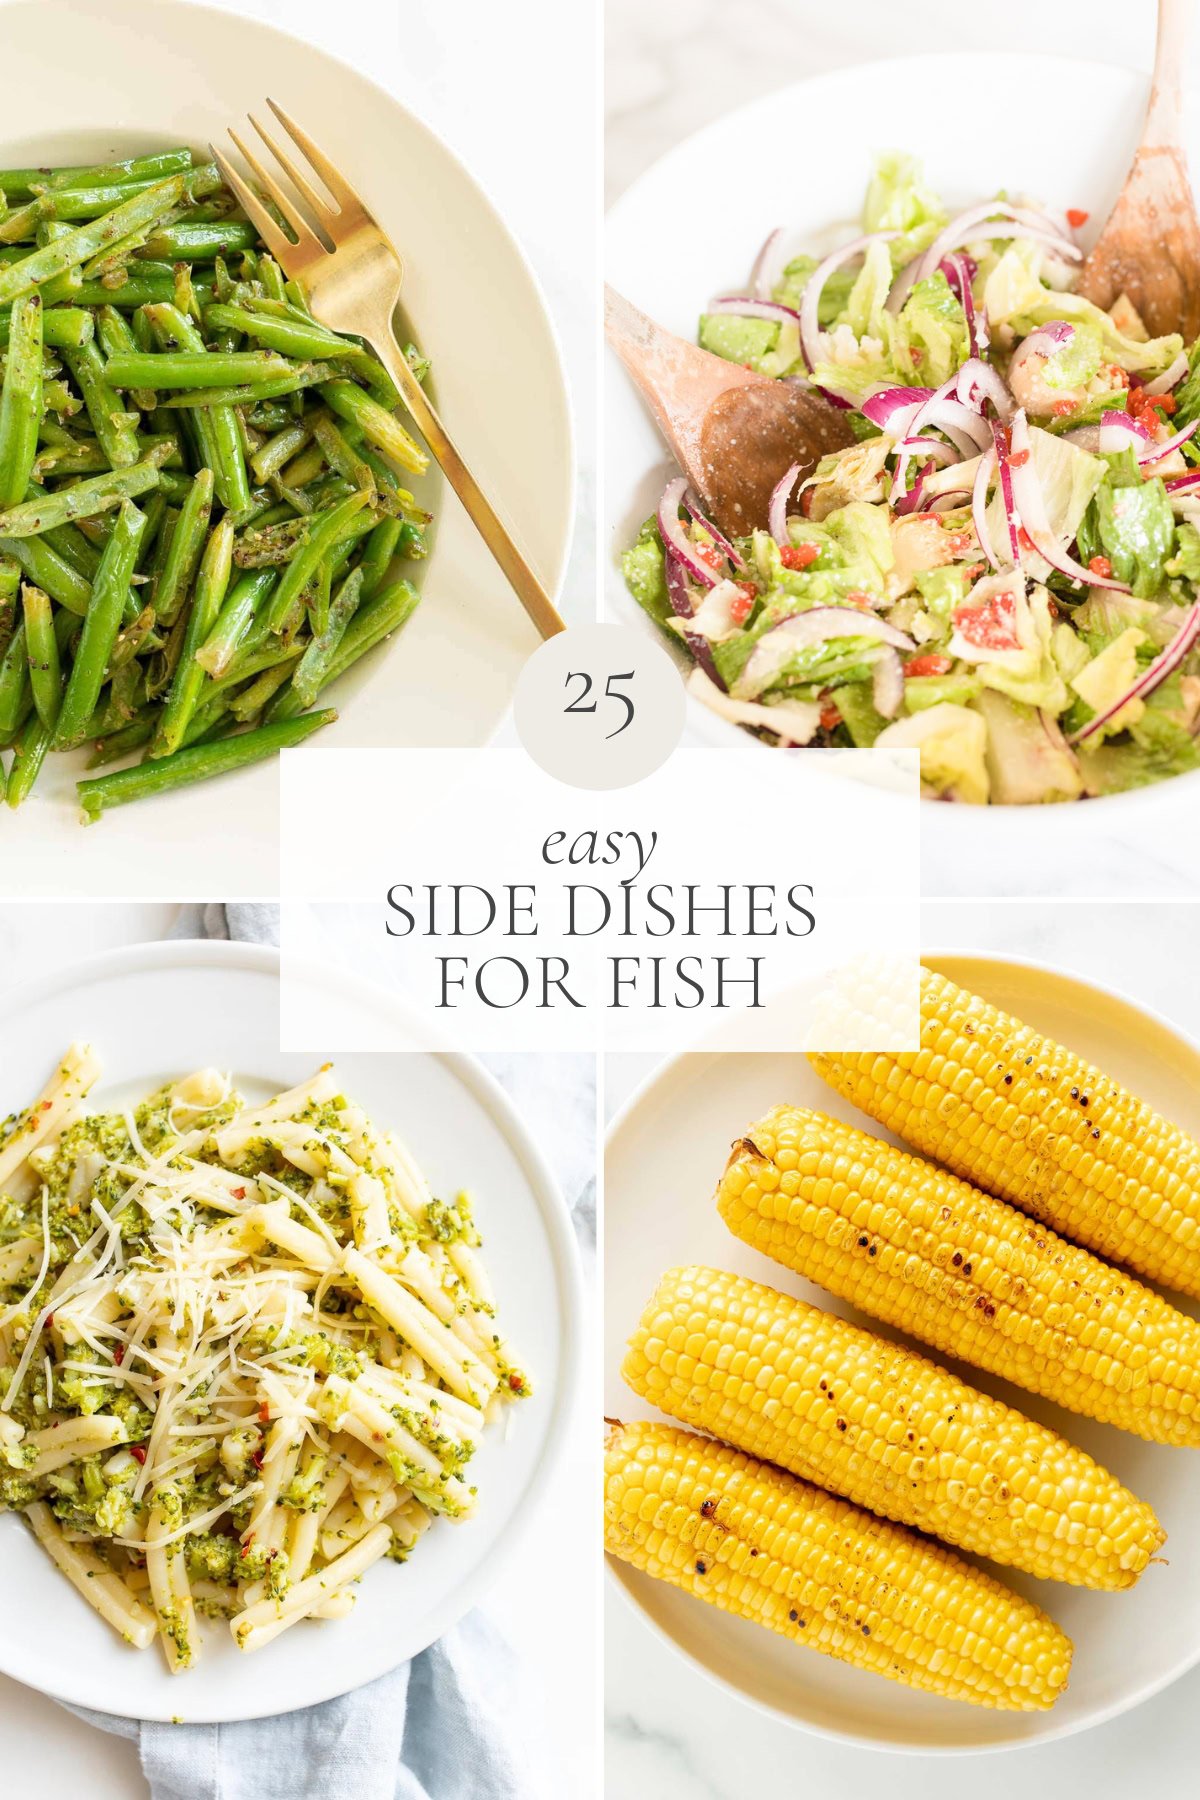 A collage of 4 different recipes that are side dishes for fish. 